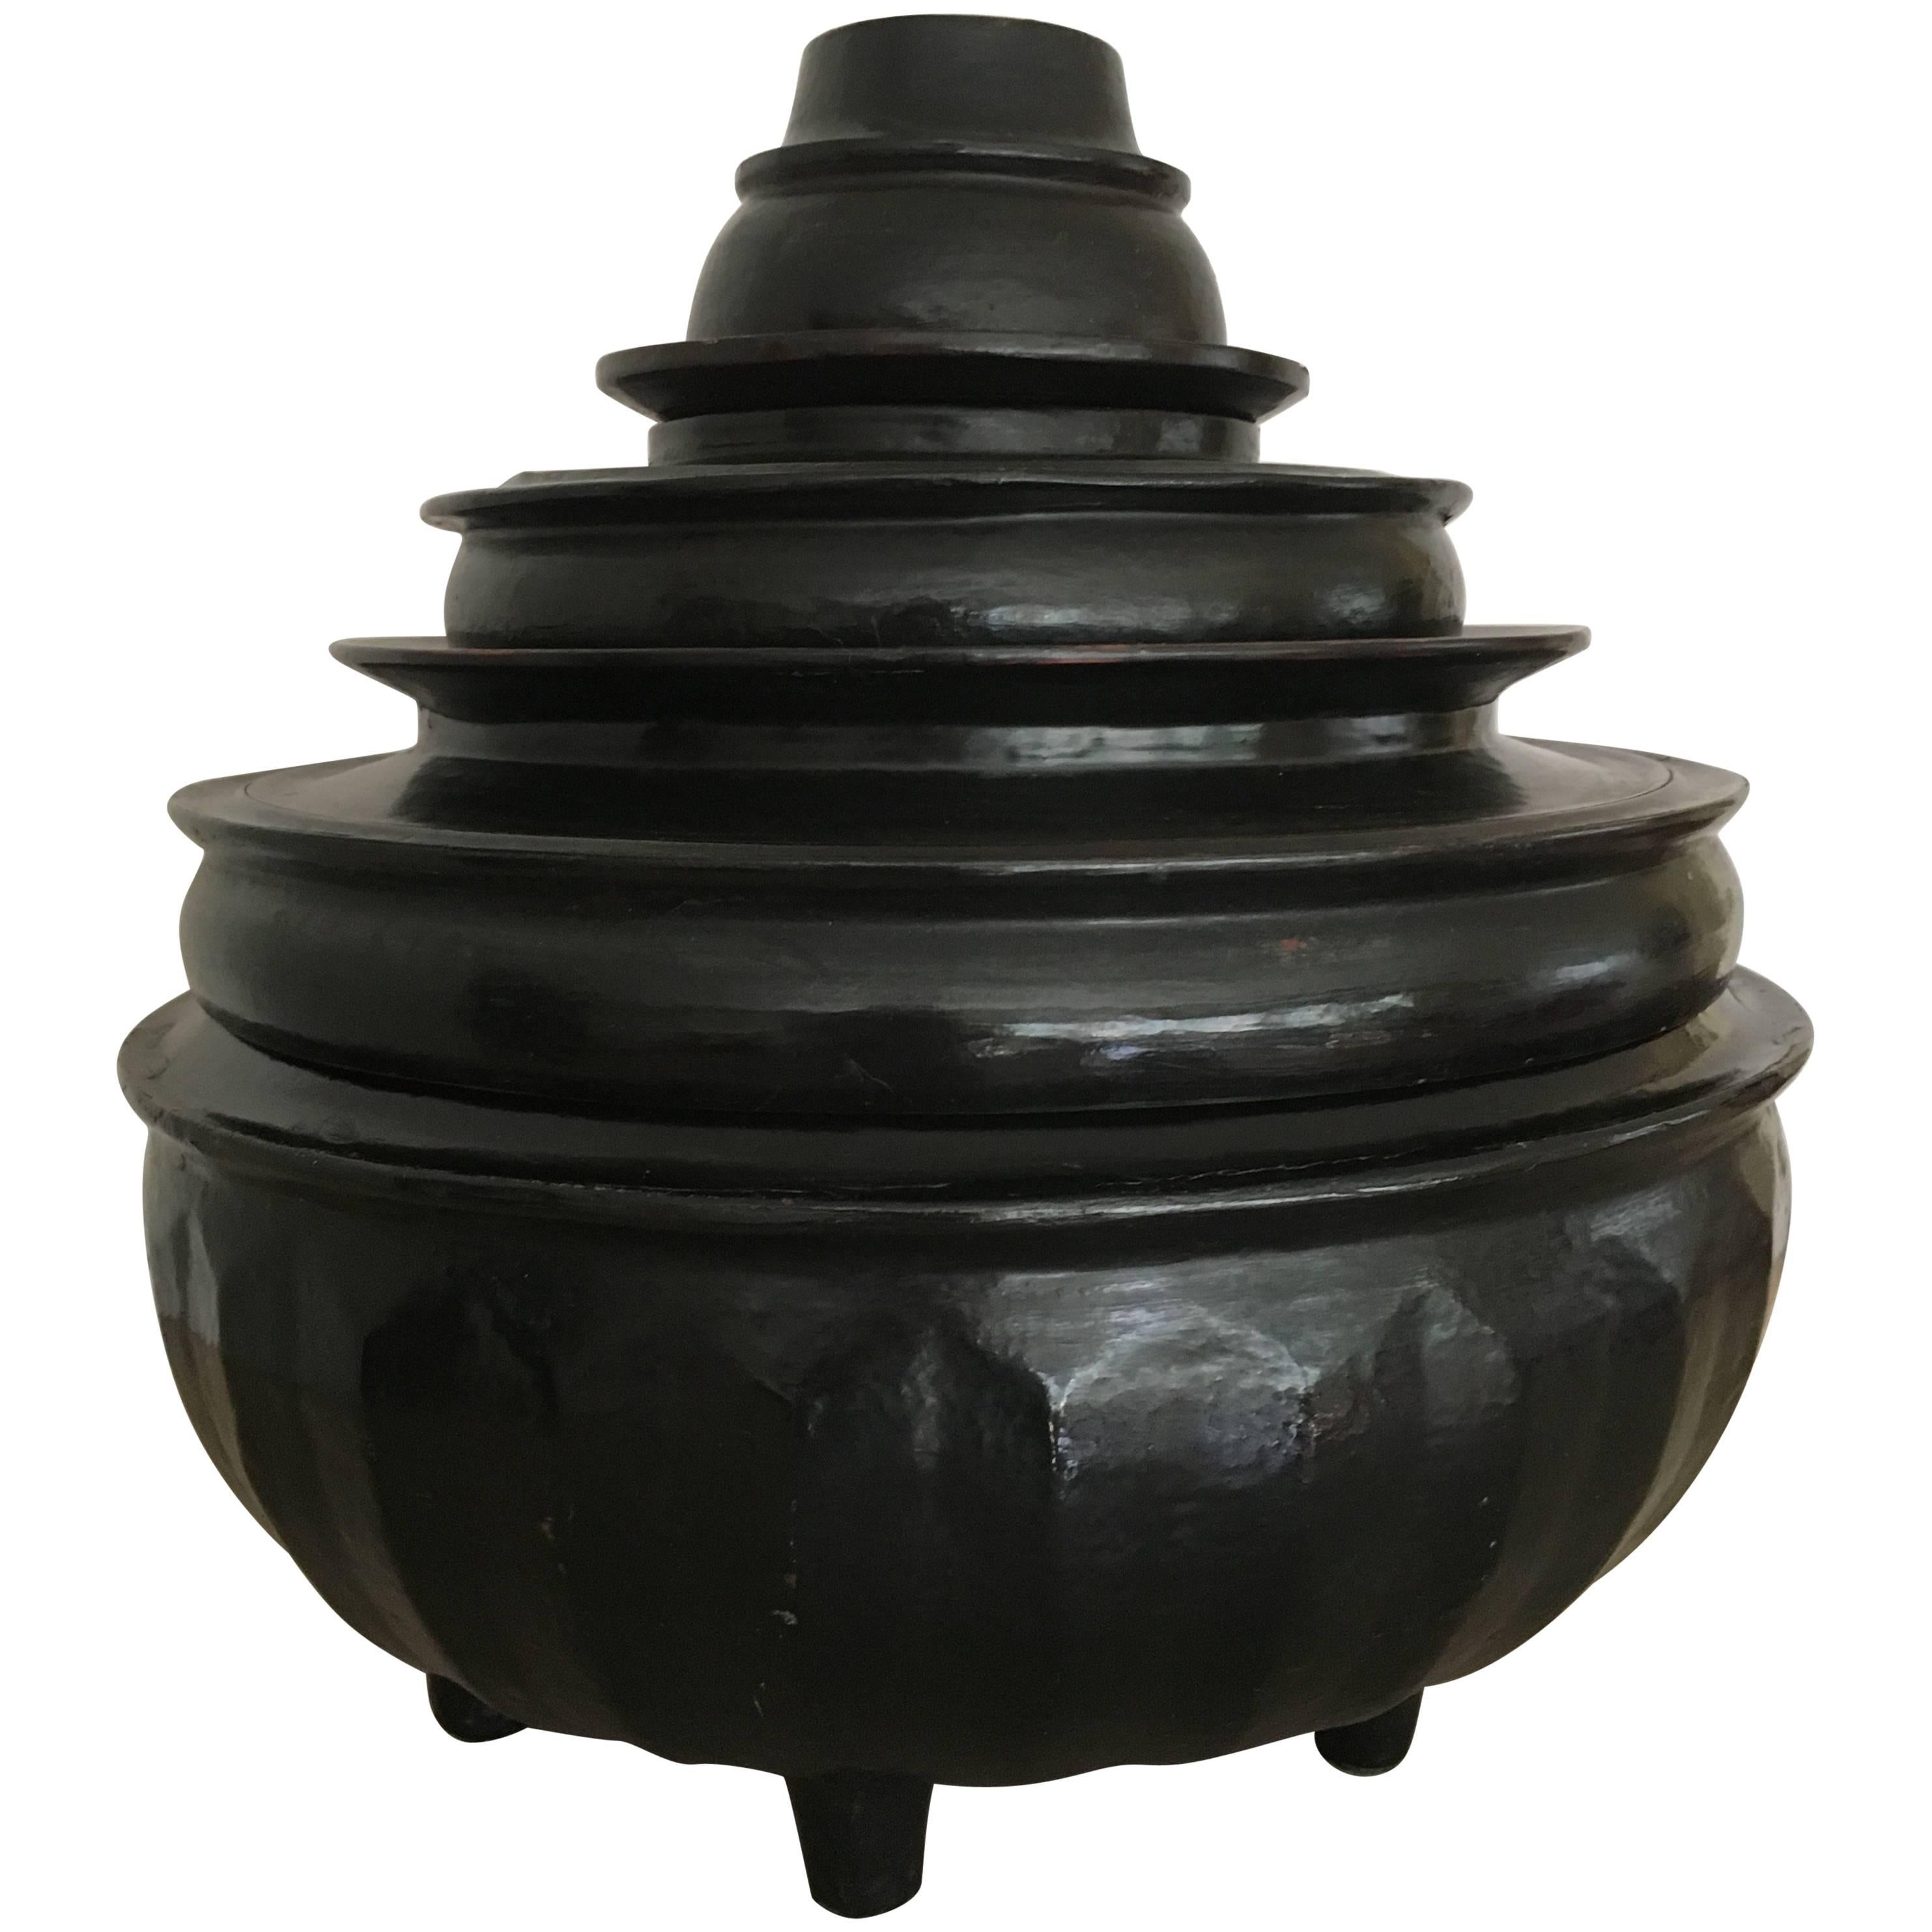 Burmese Black Lacquered Offering Bowl